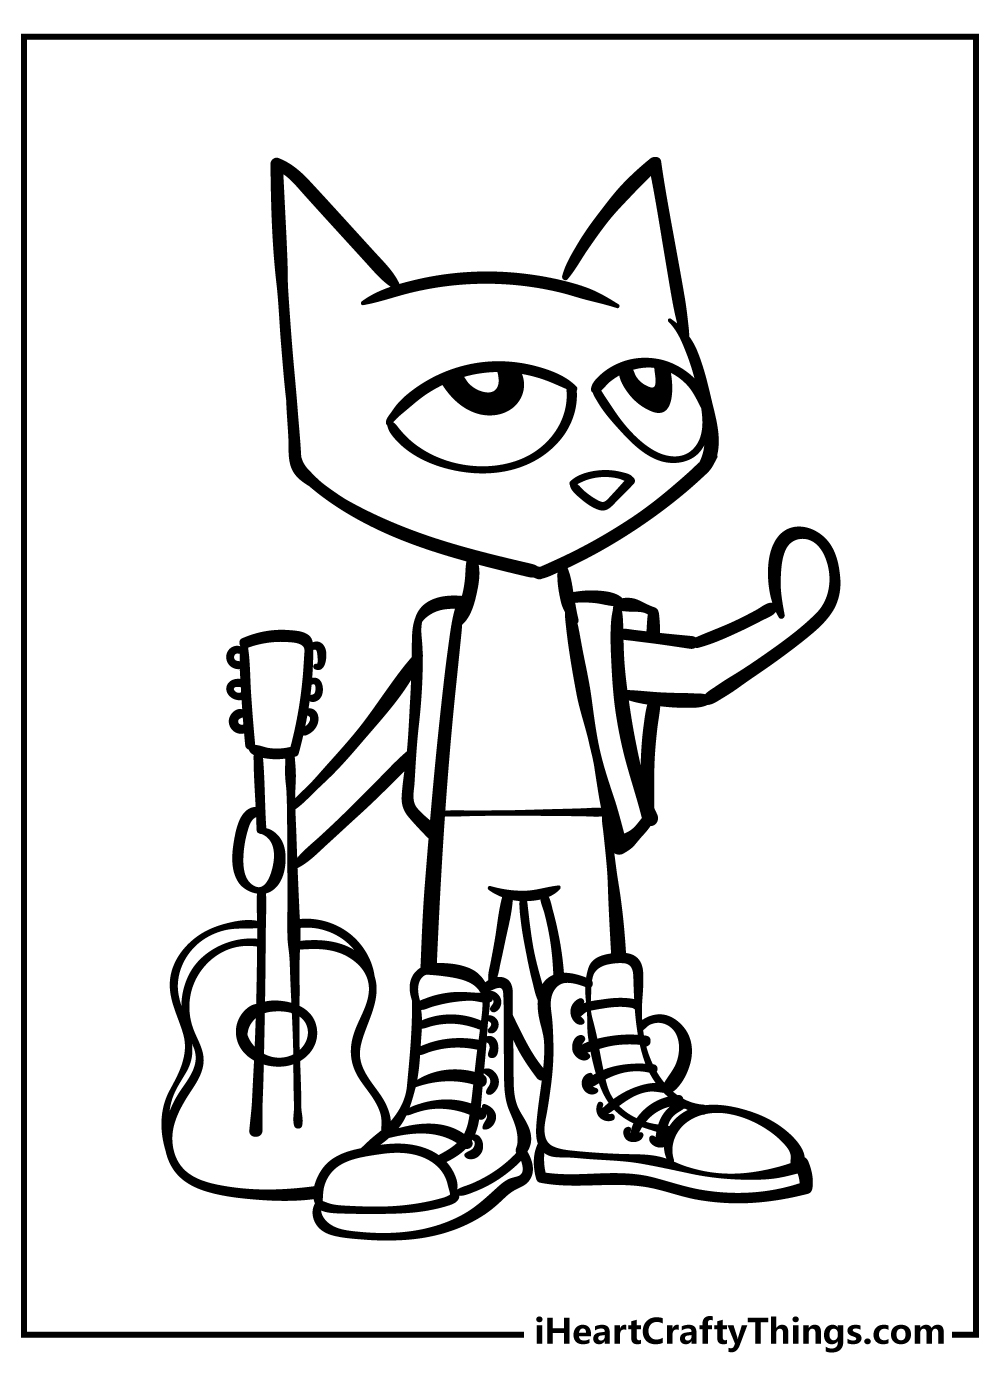 Pete The Cat Coloring Sheet for children free download